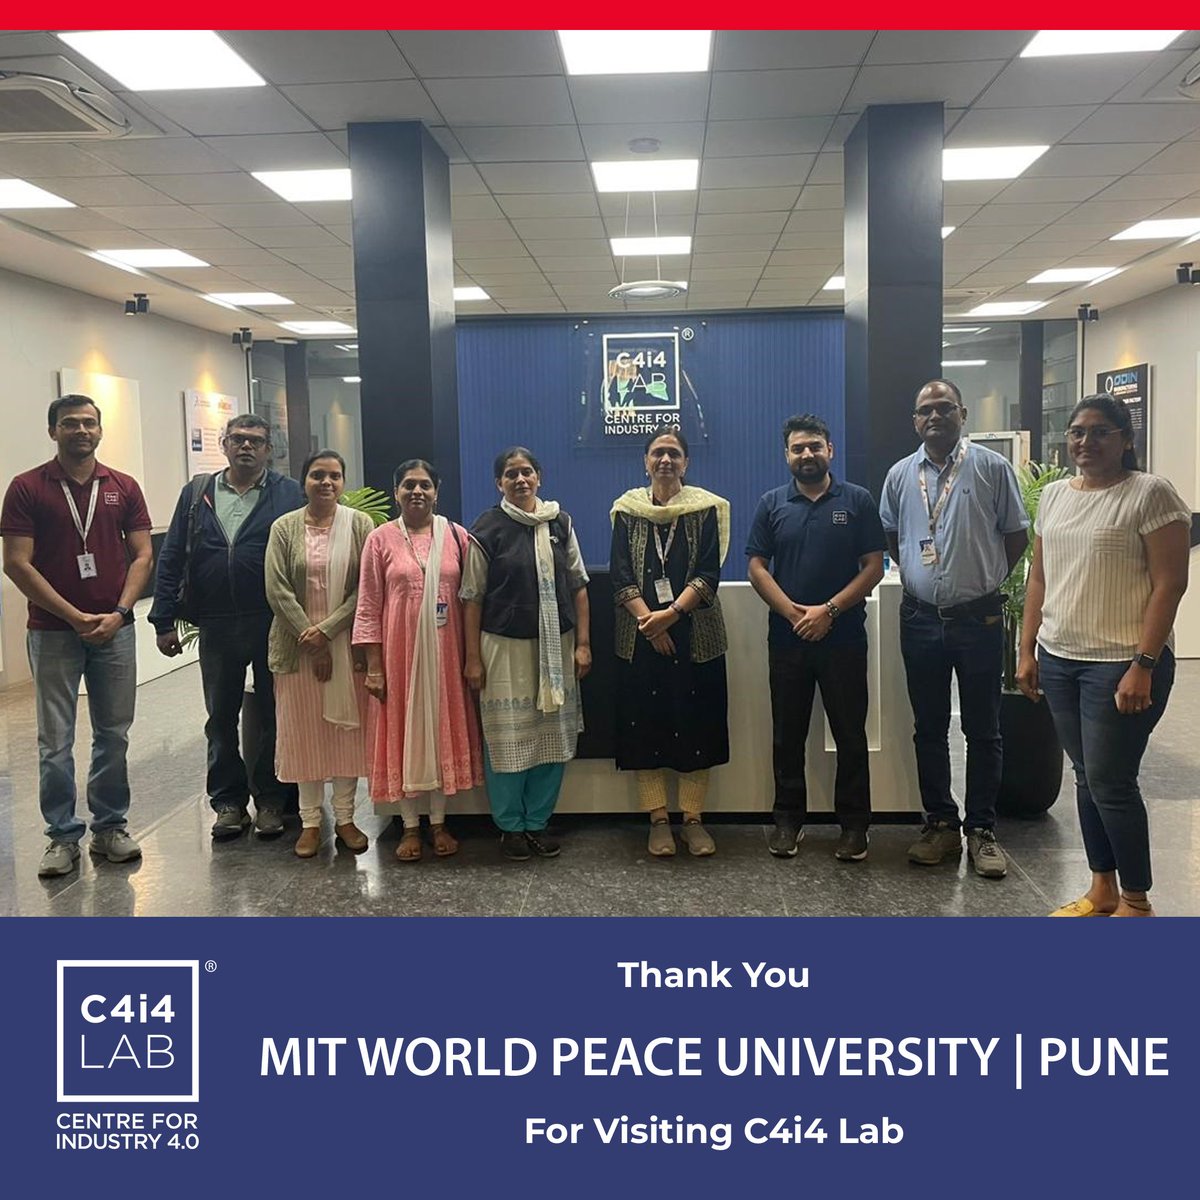 It was a pleasure to meet the MIT World Peace University team and got a chance to showcase our Model factory at Centre for Industry 4.0 (C4i4) Lab.
#teamc4i4 #MITWPU #industry4point0
@mitwpuofficial